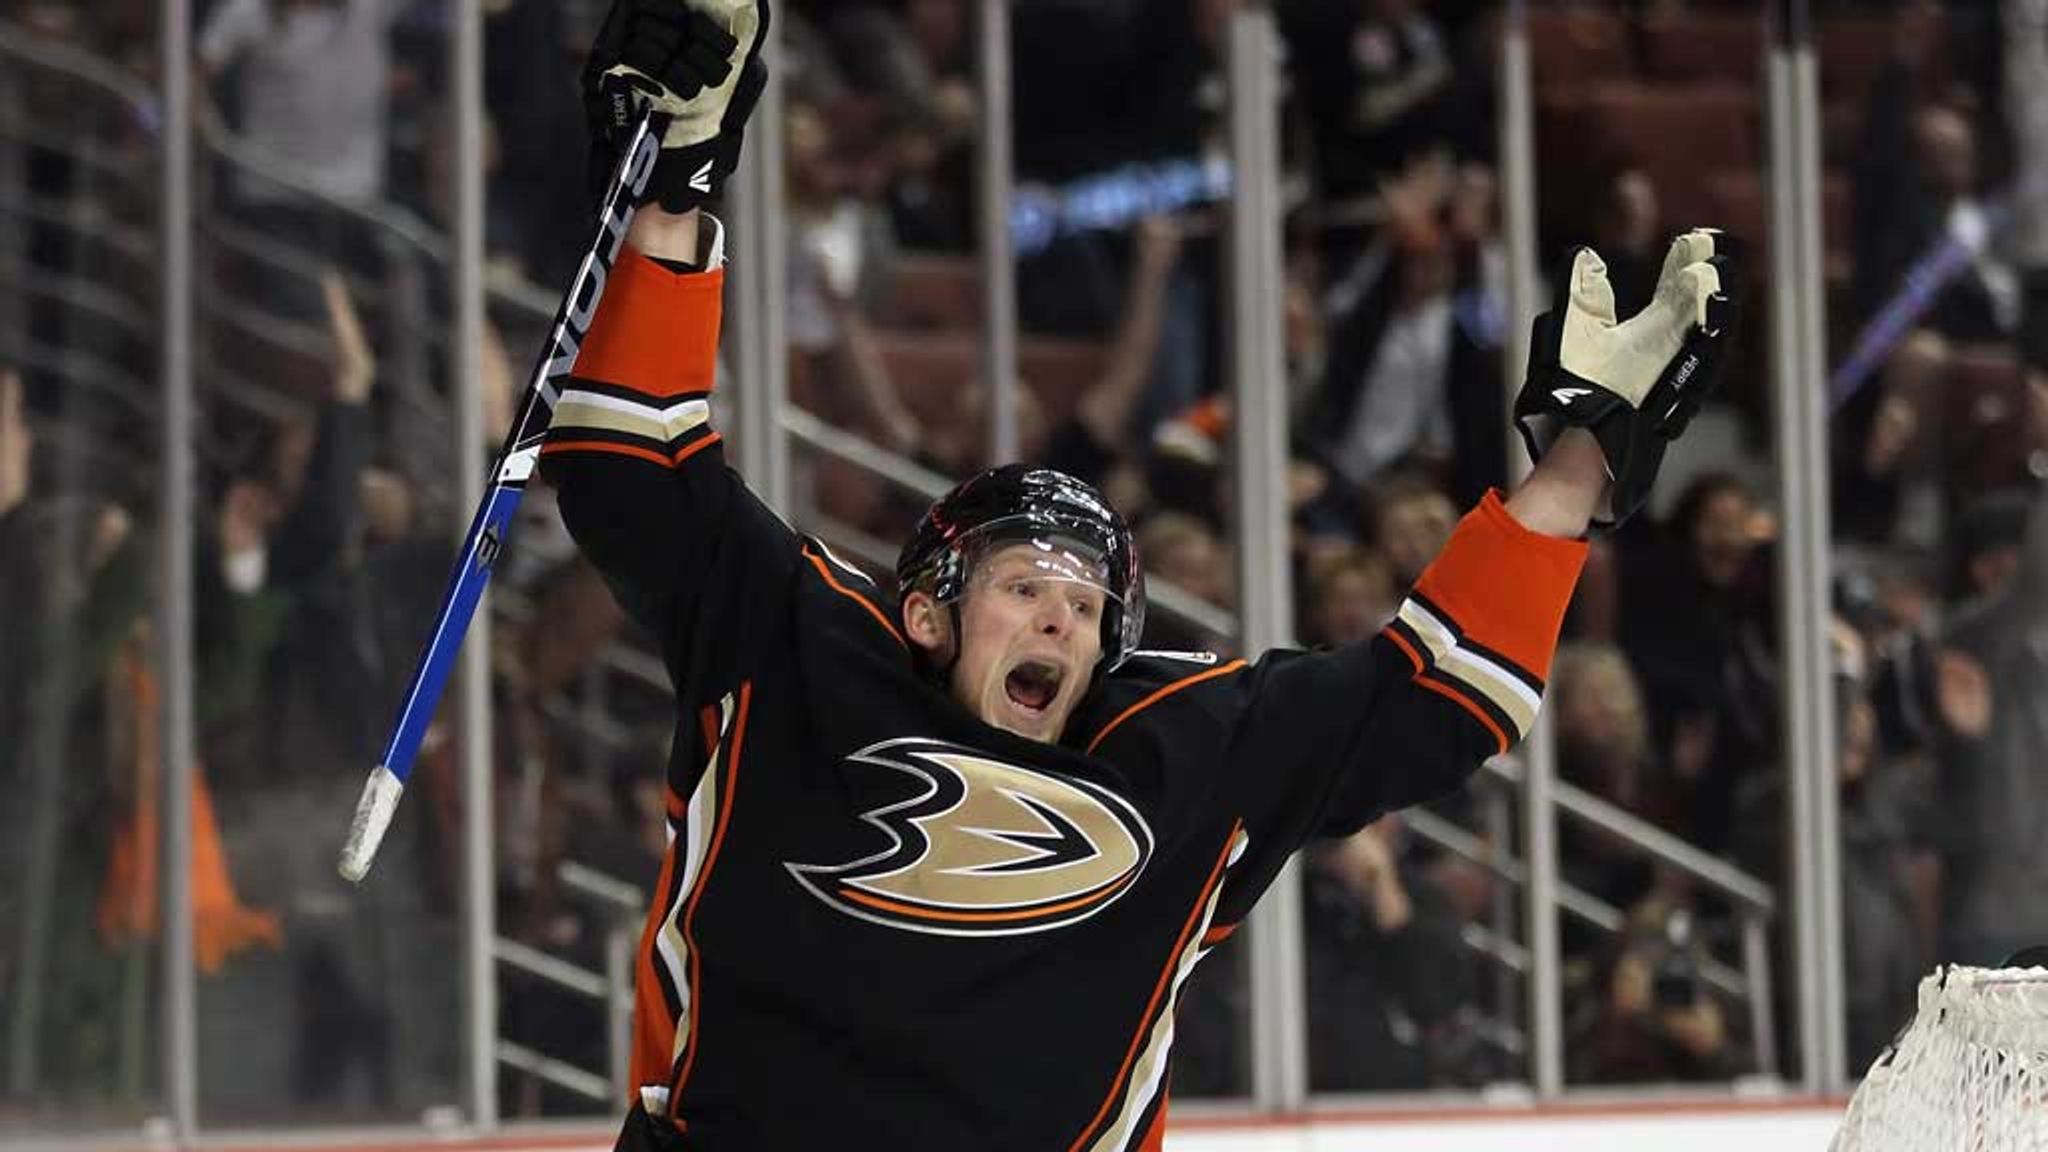 Corey Perry scores twice in Ducks' win over Sabres